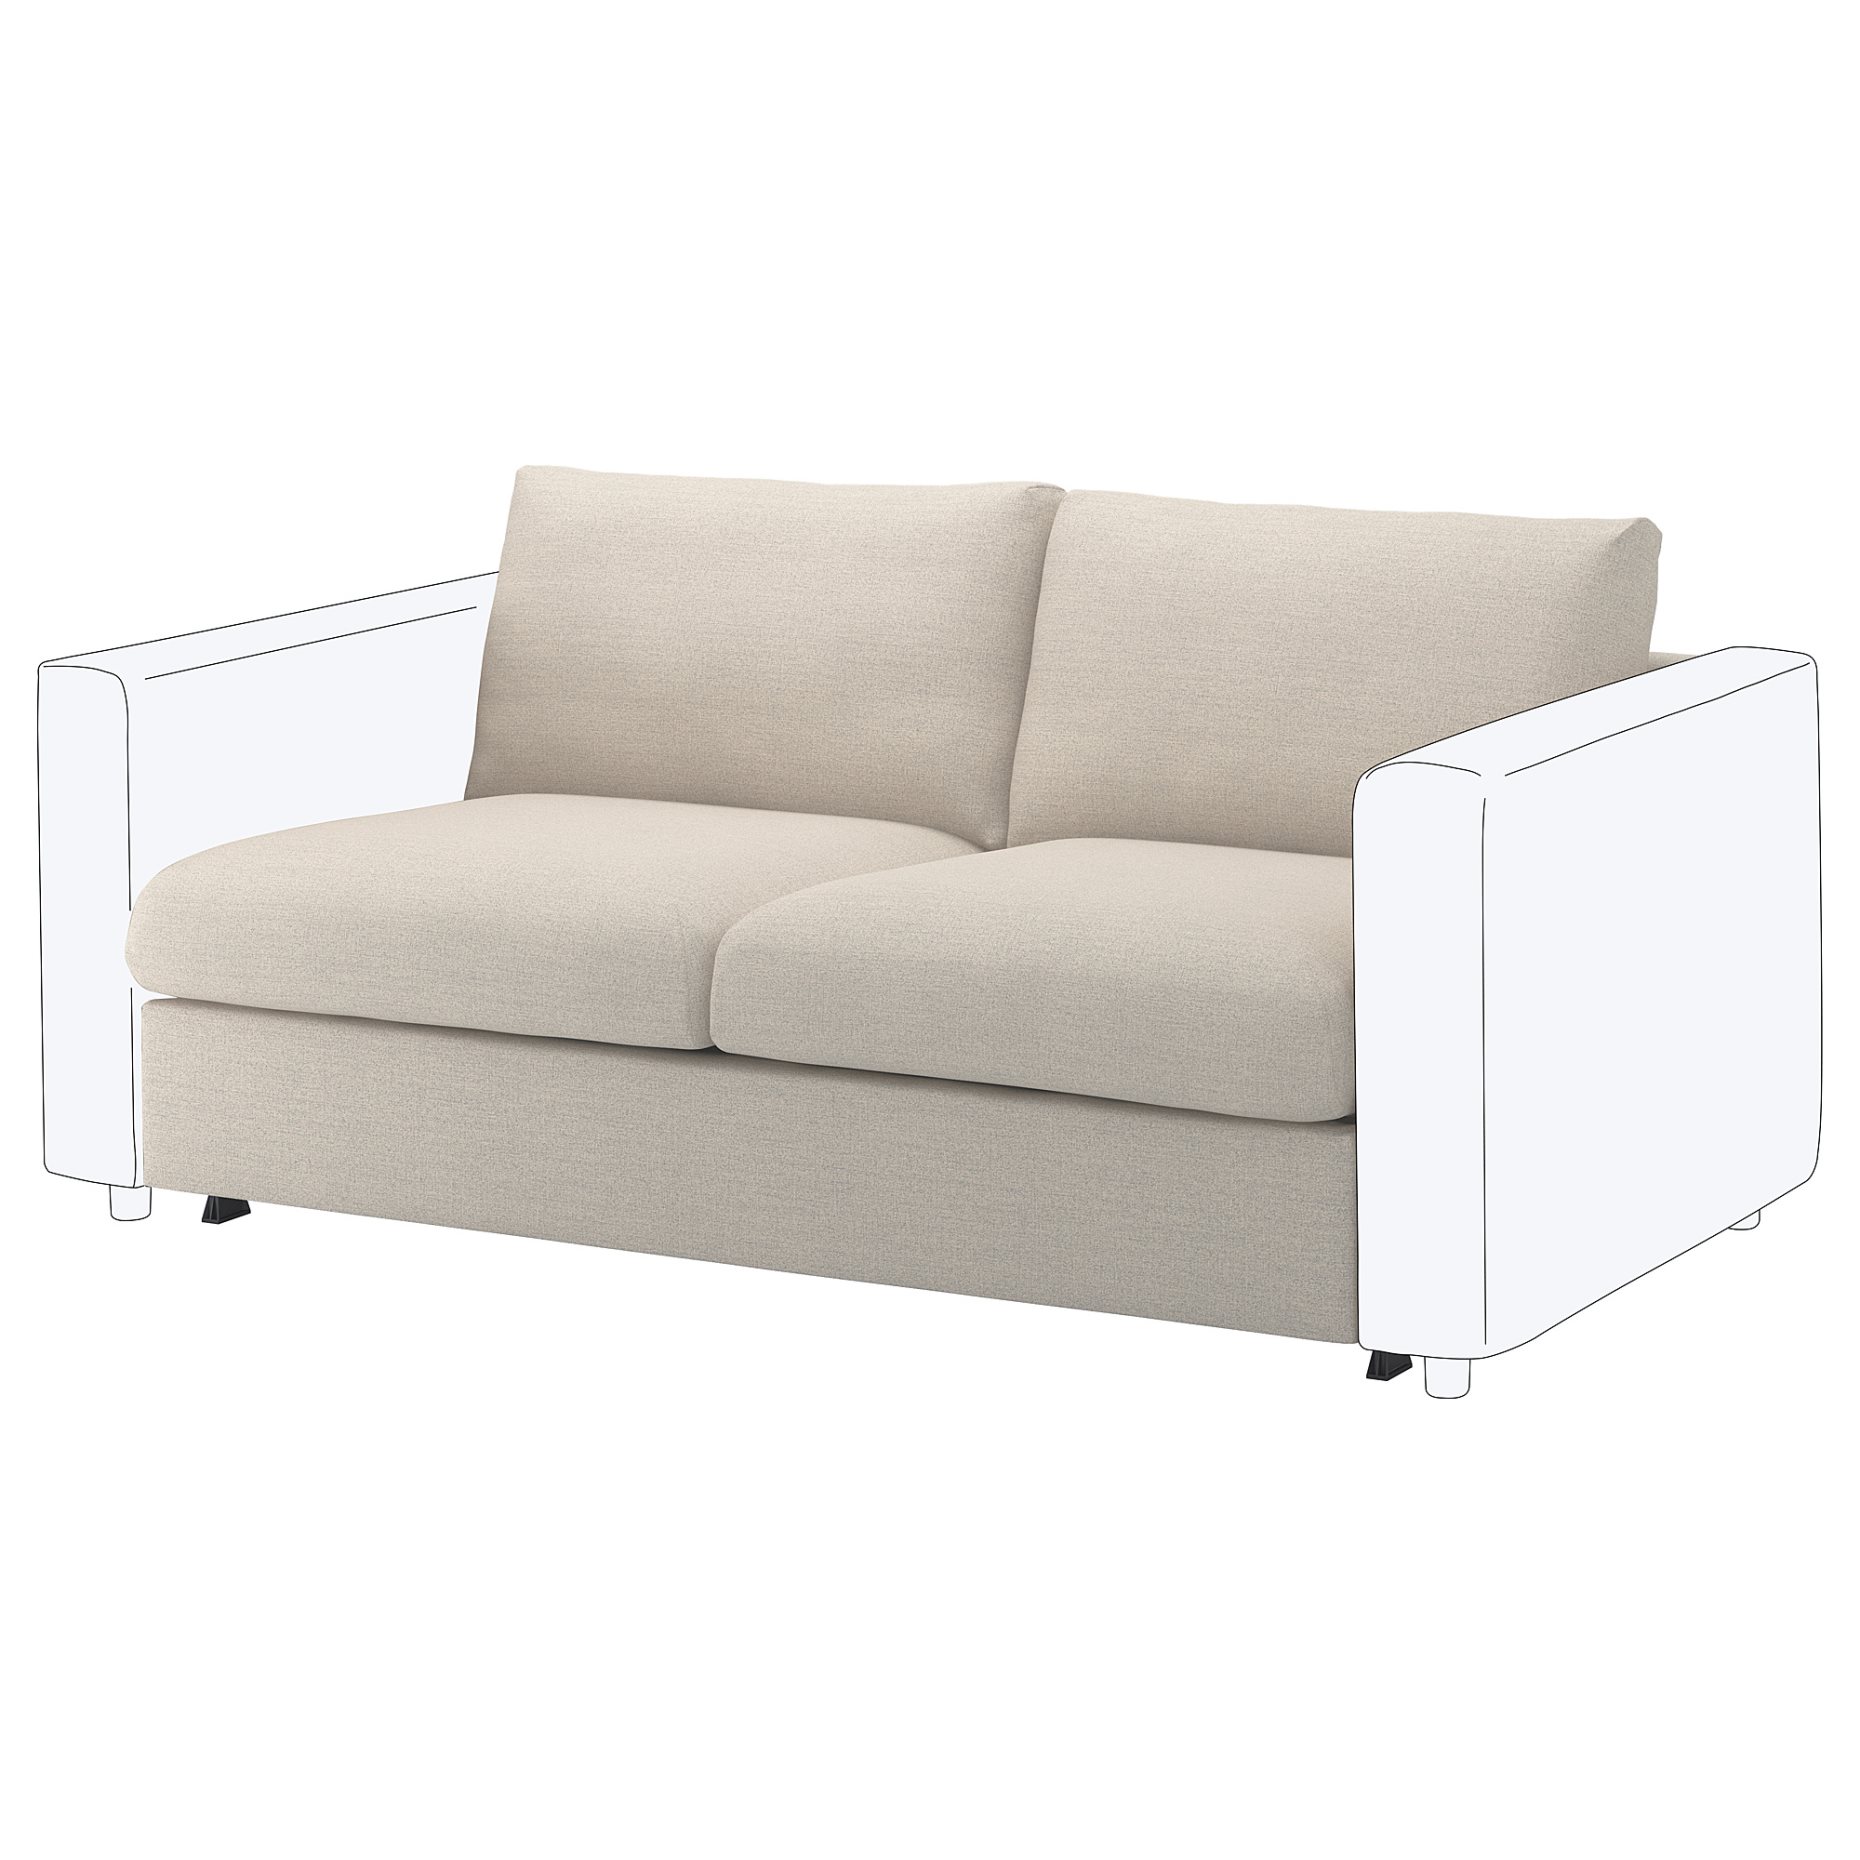 VIMLE, 2-seat sofa-bed section, 595.452.21